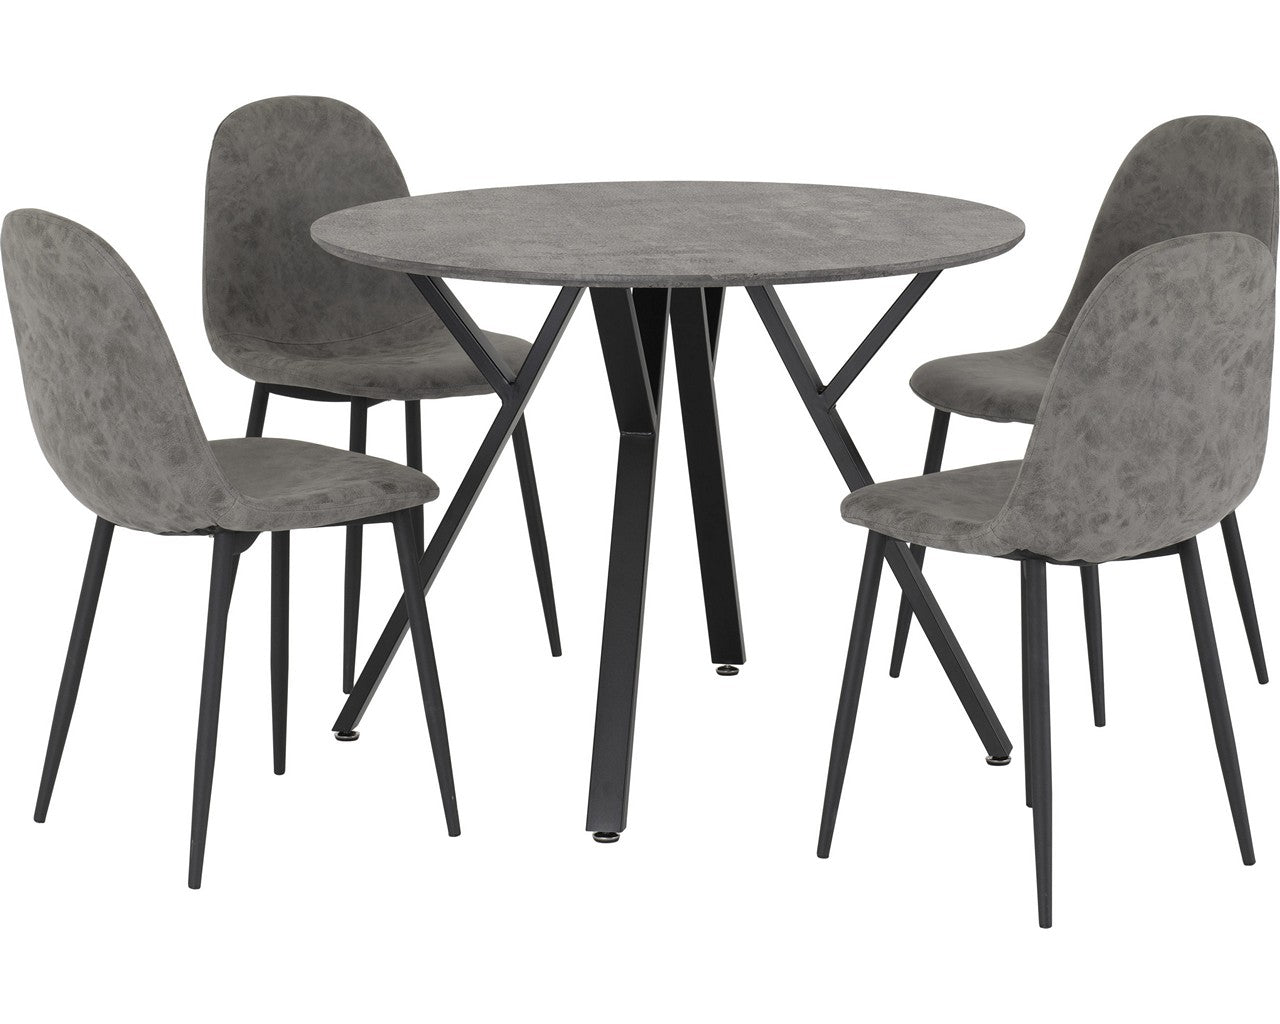 athens-round-dining-set-athens-chairs - 1